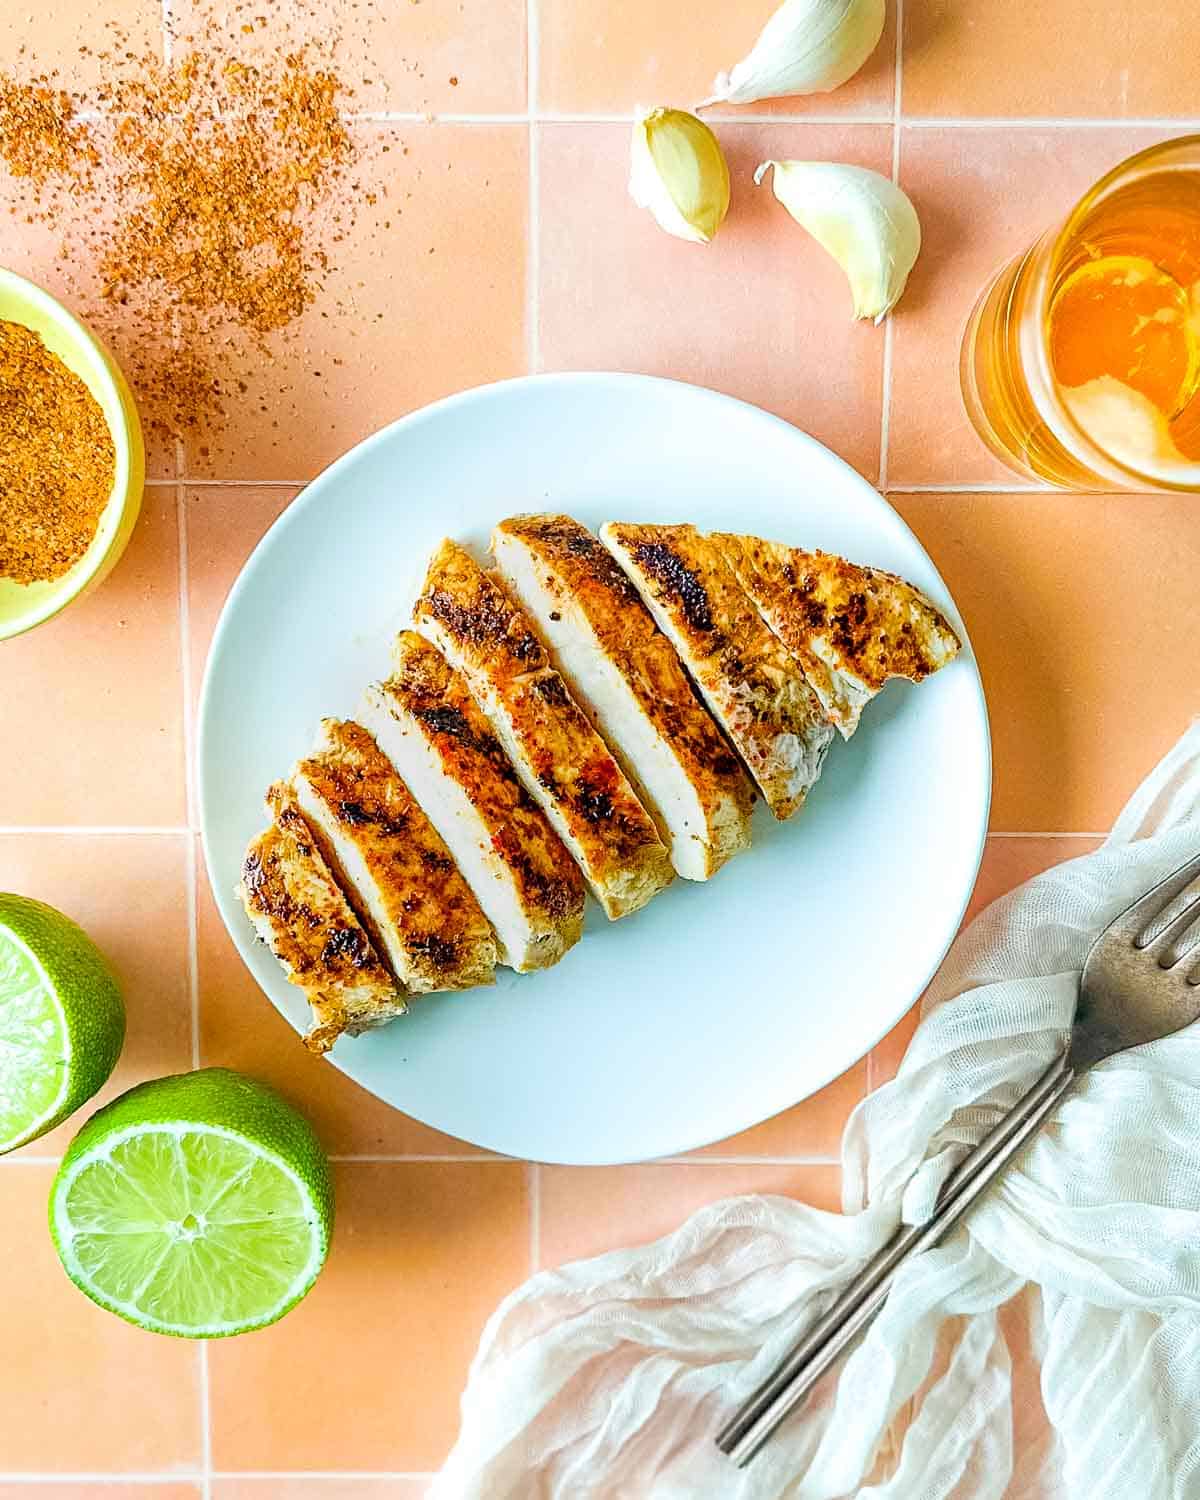 Sliced Tajín Grilled Chicken sits on a white plate surrounded by Tajín seasoning, a sliced lime, a white linen, and a small glass of beer.